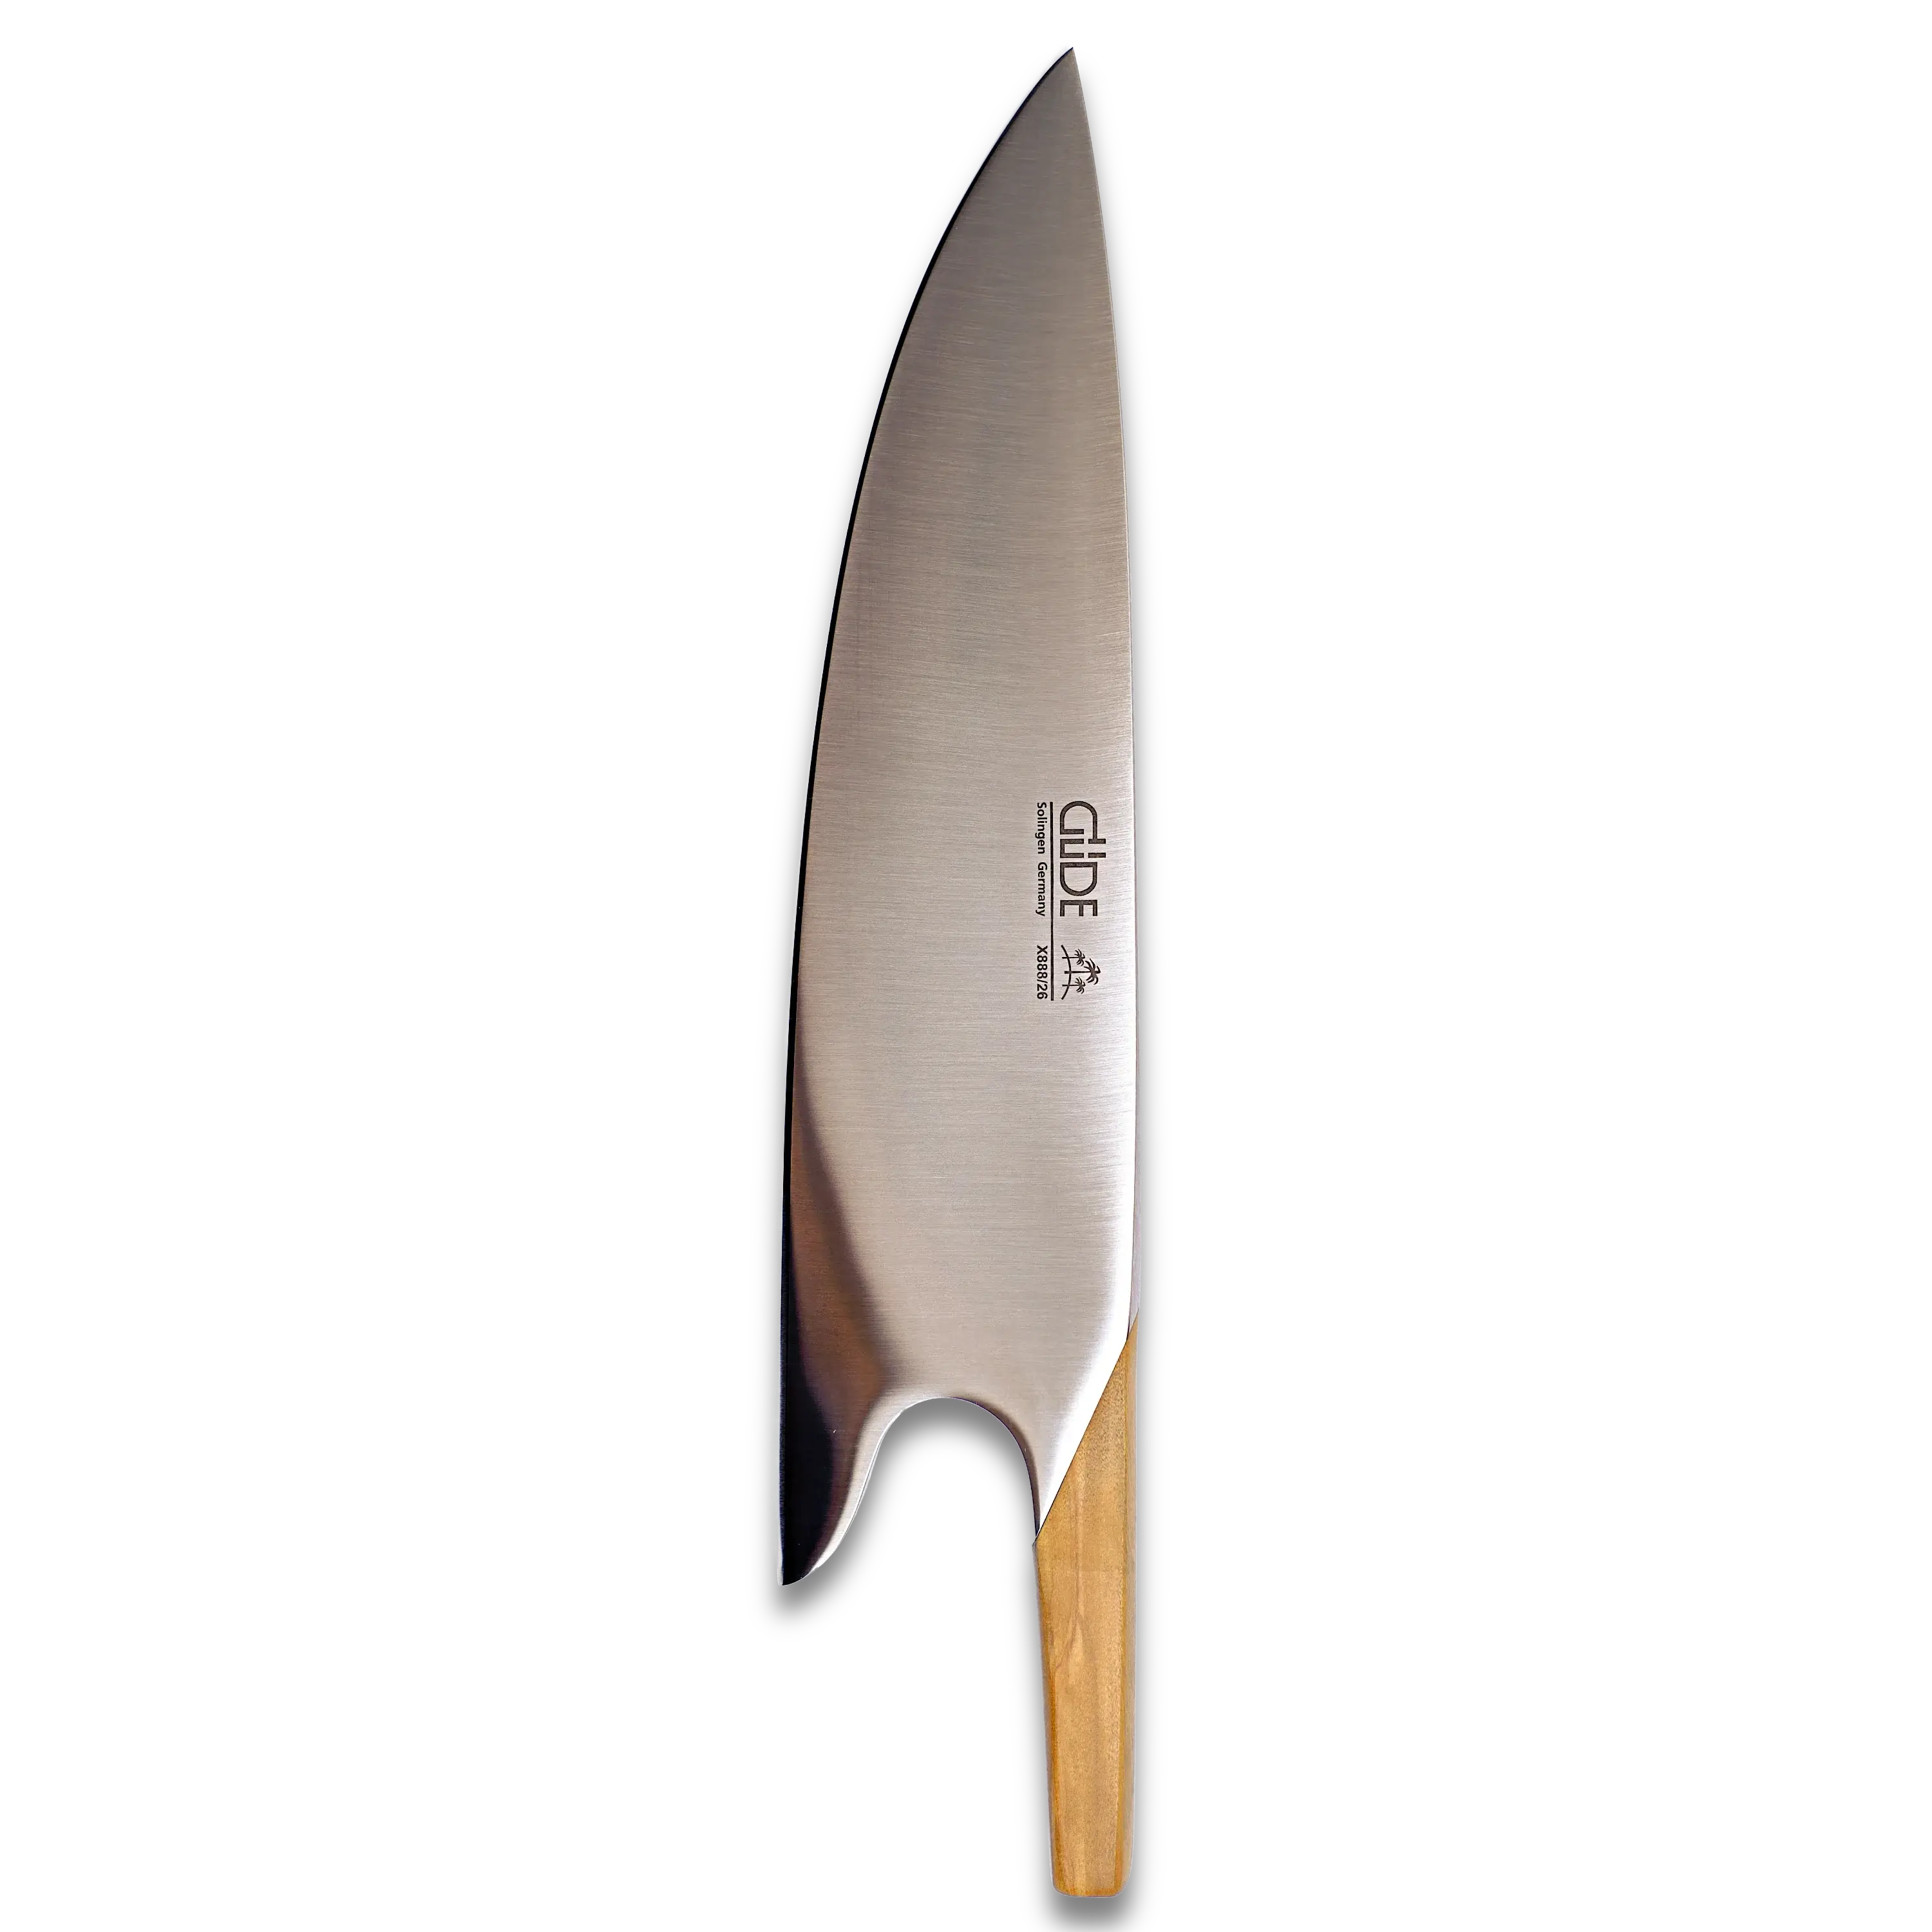 THE KNIFE | Blade length 10-inch | Forged Steel  Olive wood handle